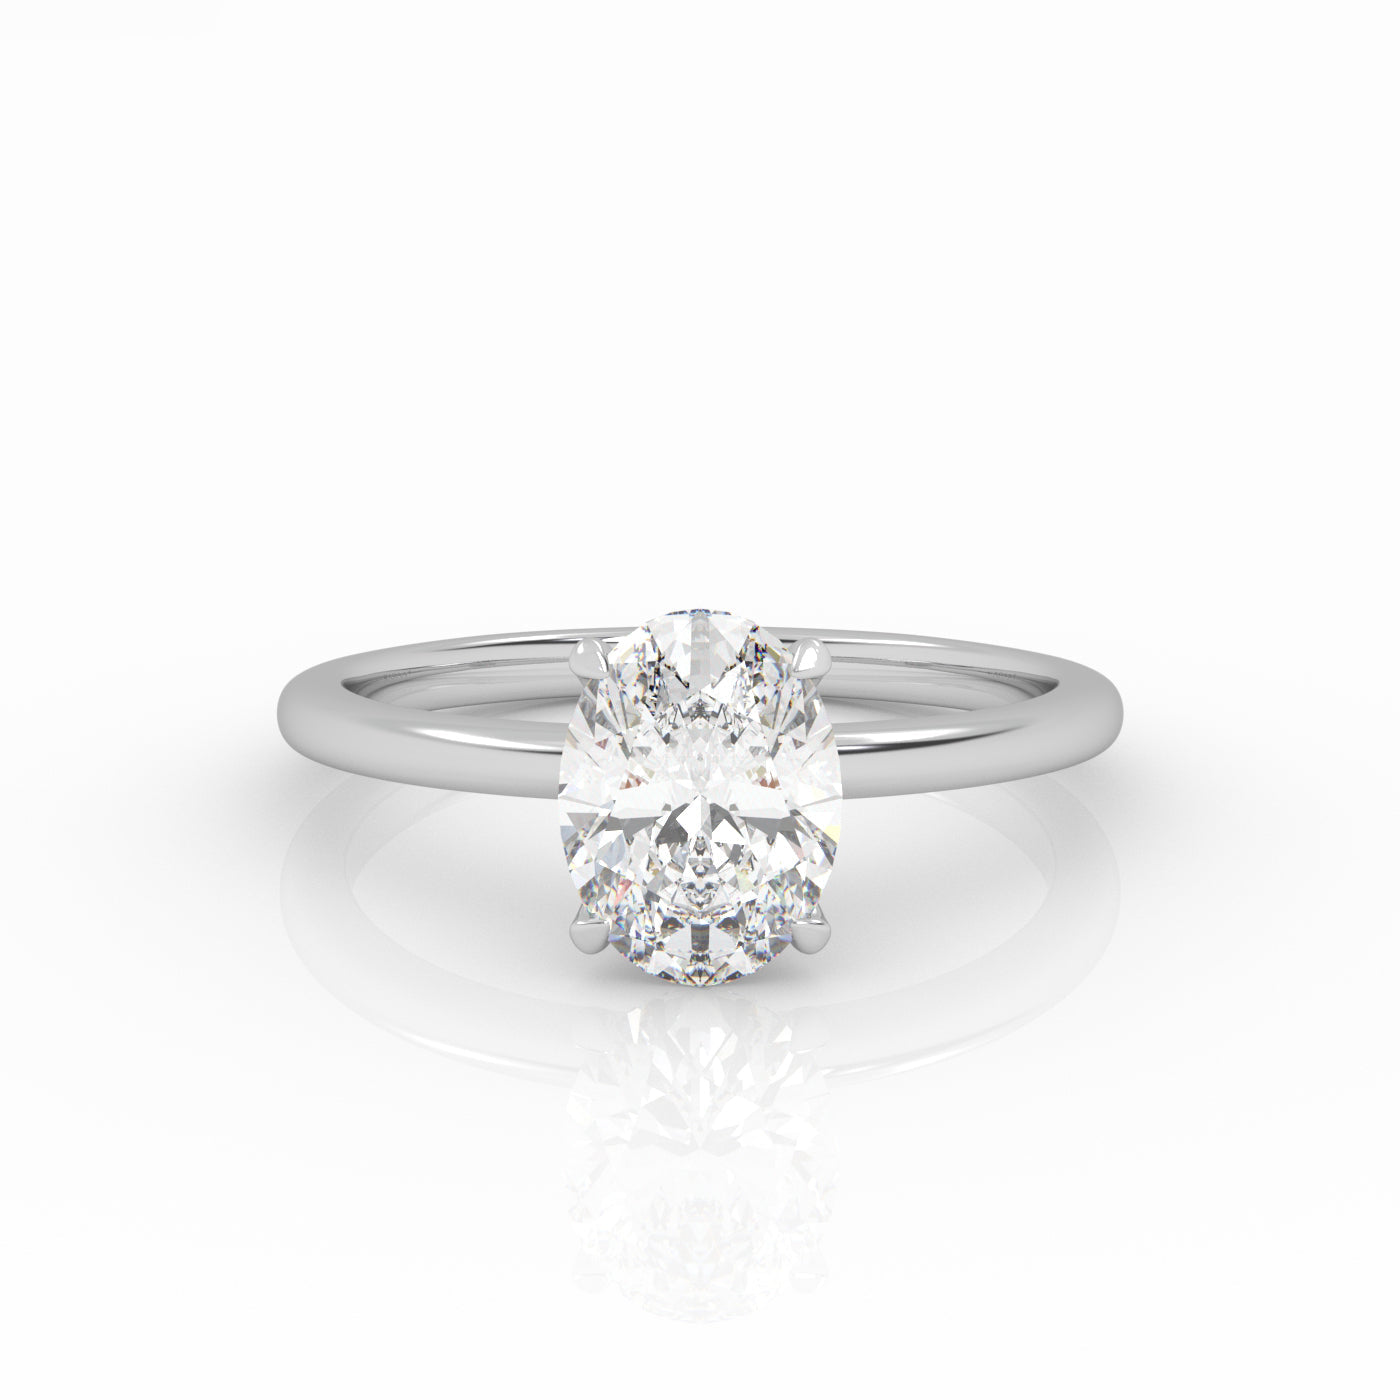 The Oval Solitaire